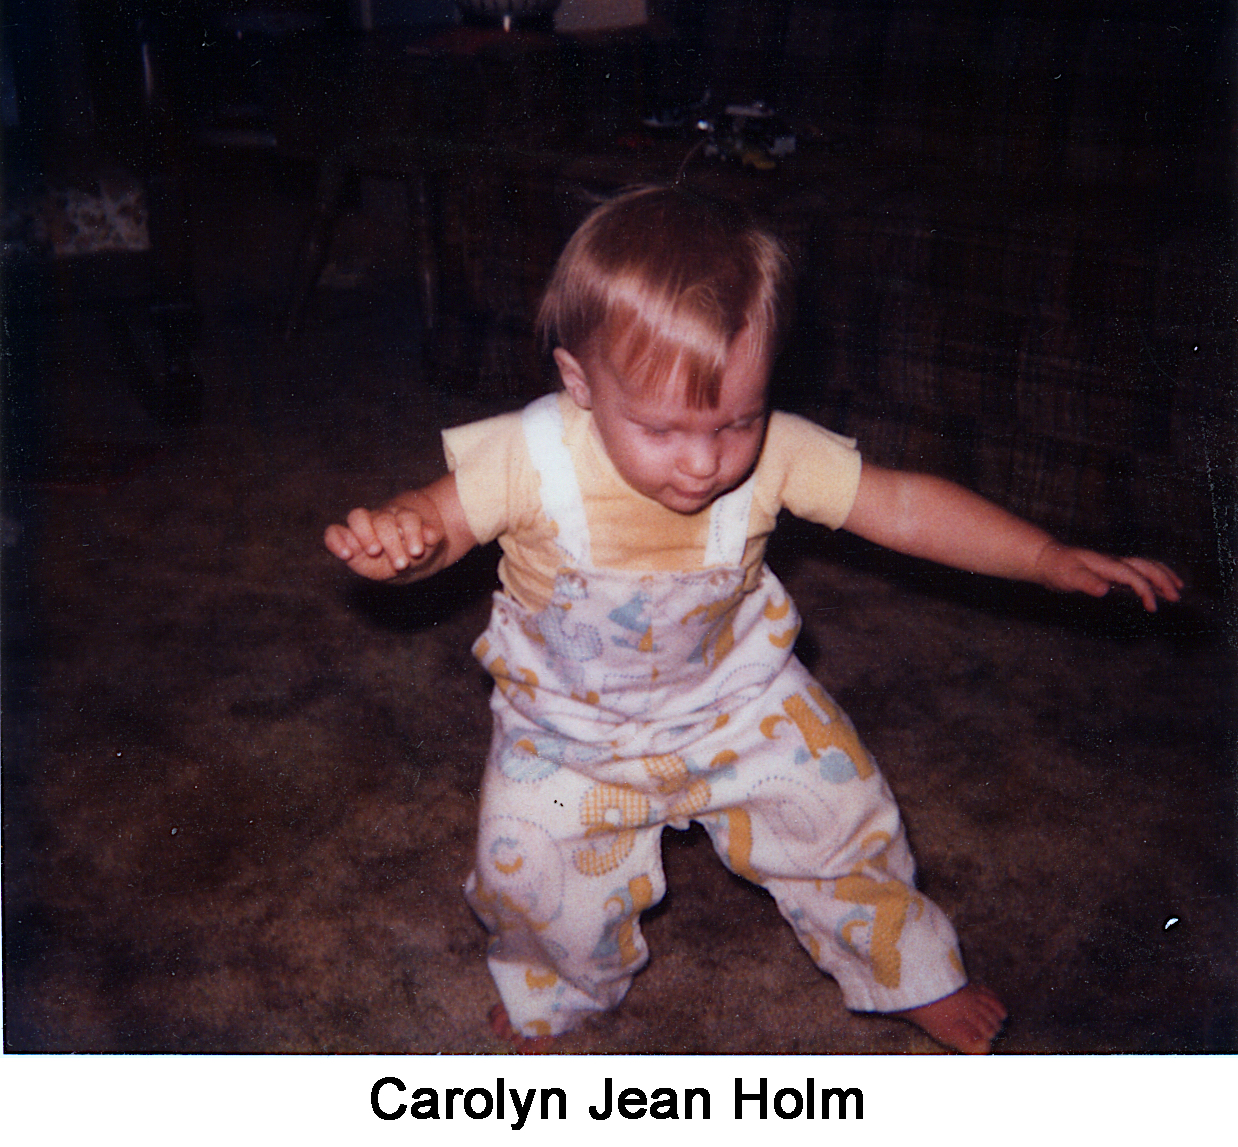 Toddler Carolyn Holm standing with her arms spread